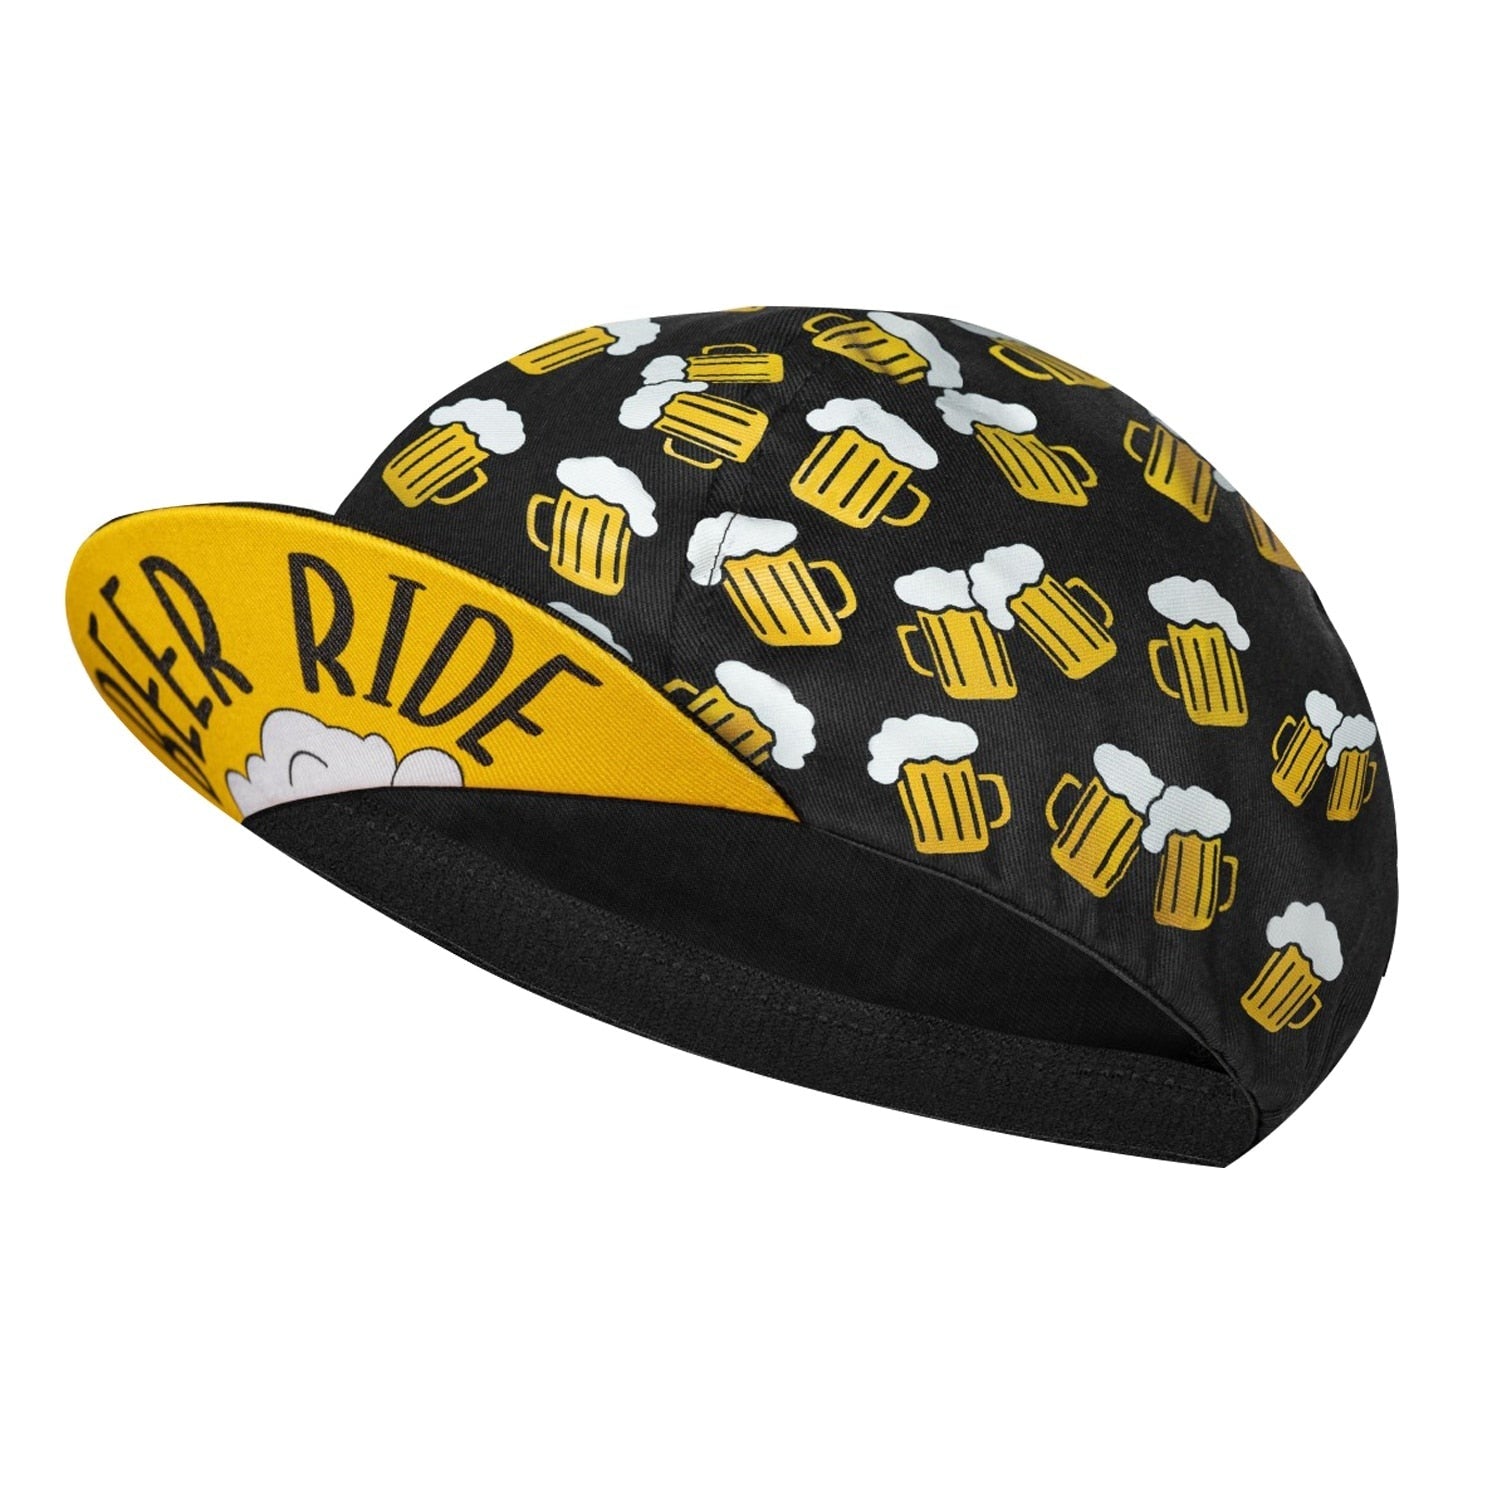 Classic Retro Black  Beer Polyester Bicycle Men's Caps Quick Dry Breathable Summer Sports Cycling Balaclava Cool